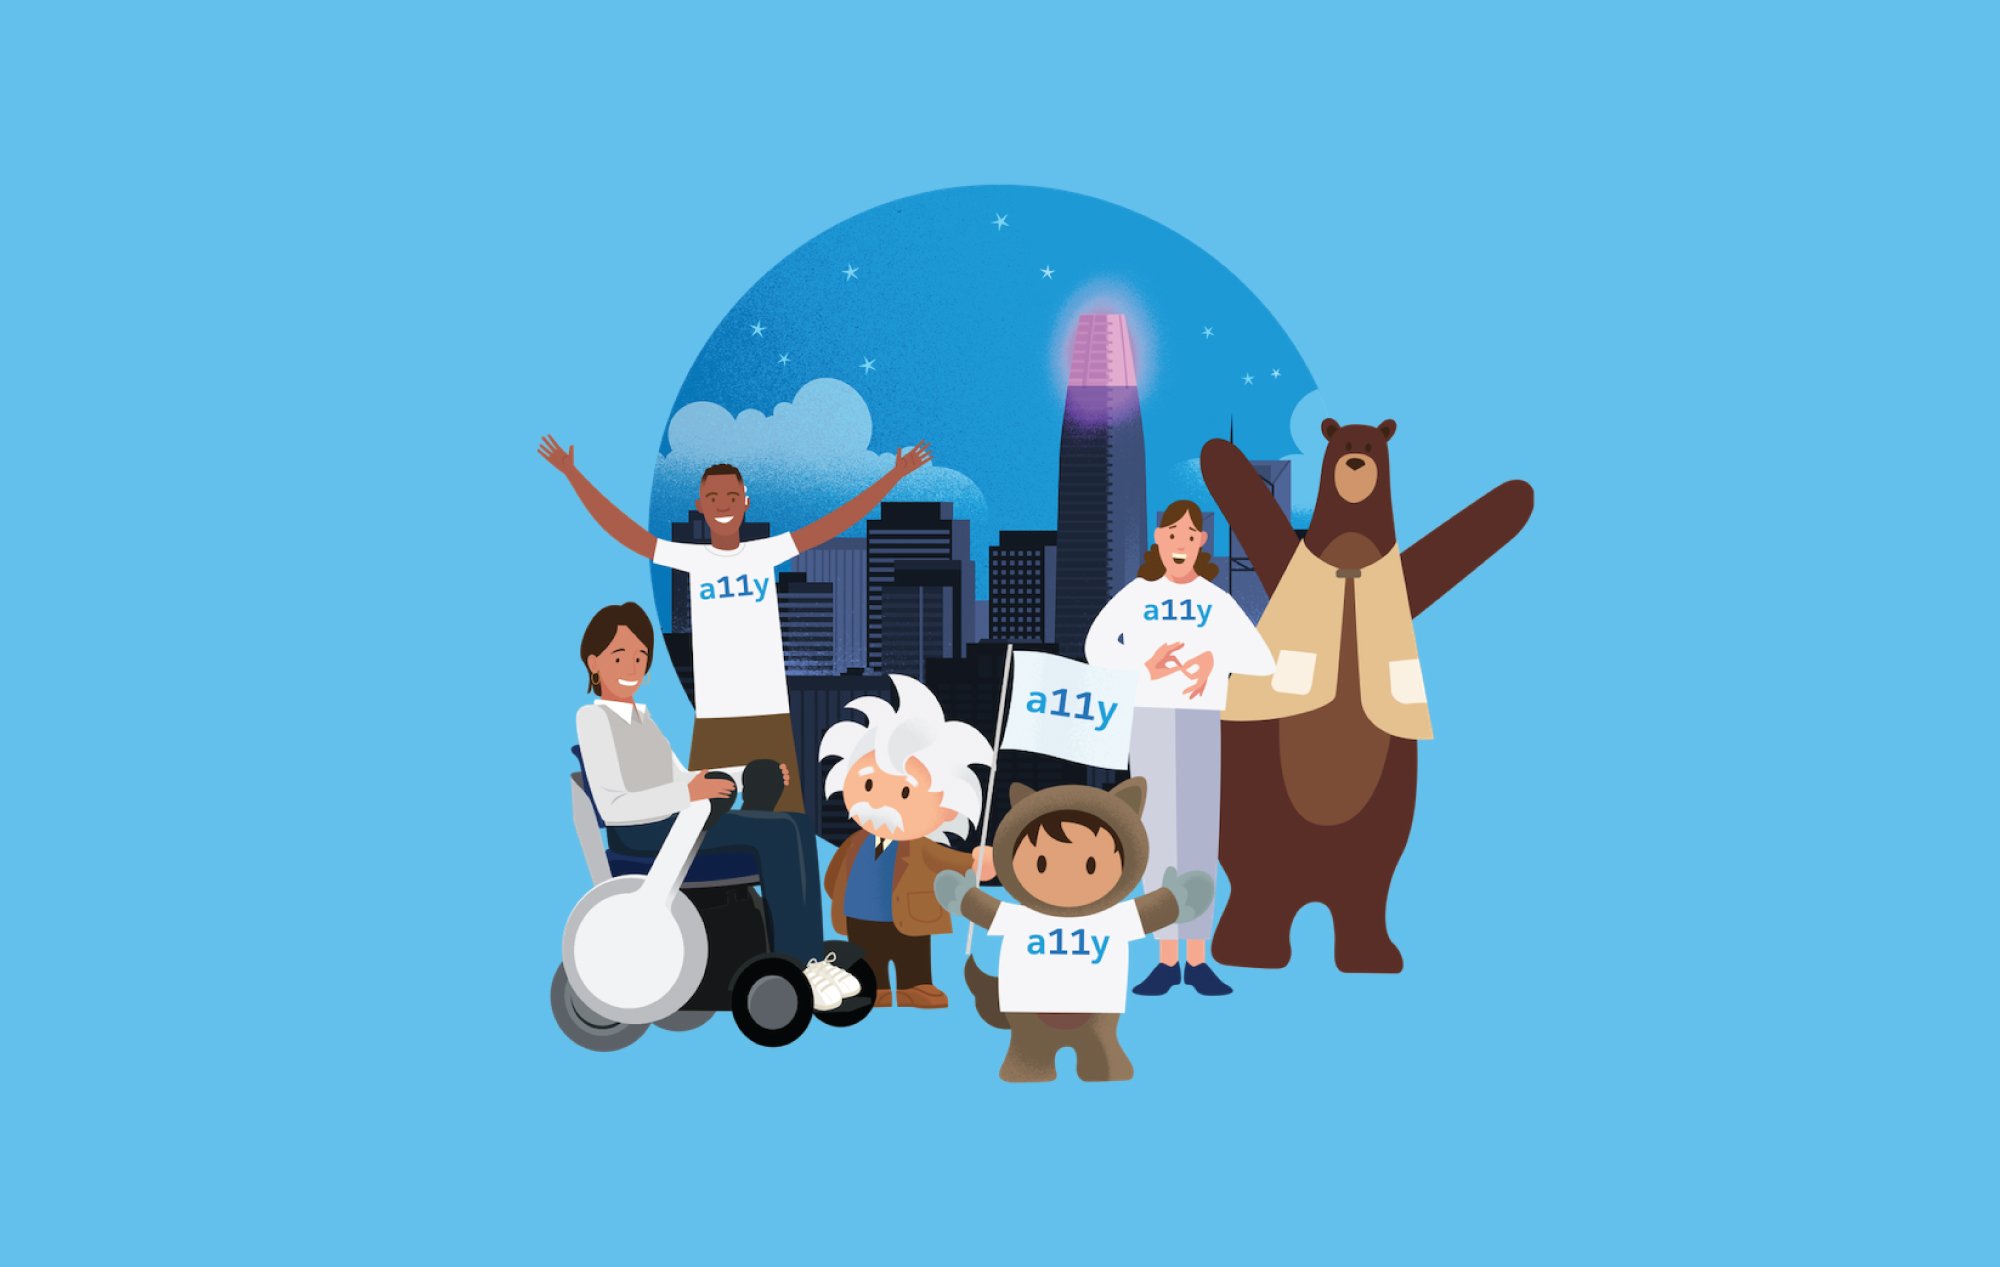 Illustration of Salesforce characters standing in front of a circular cityscape at night. Several are wearing shirts or holding a sign that says a11y.